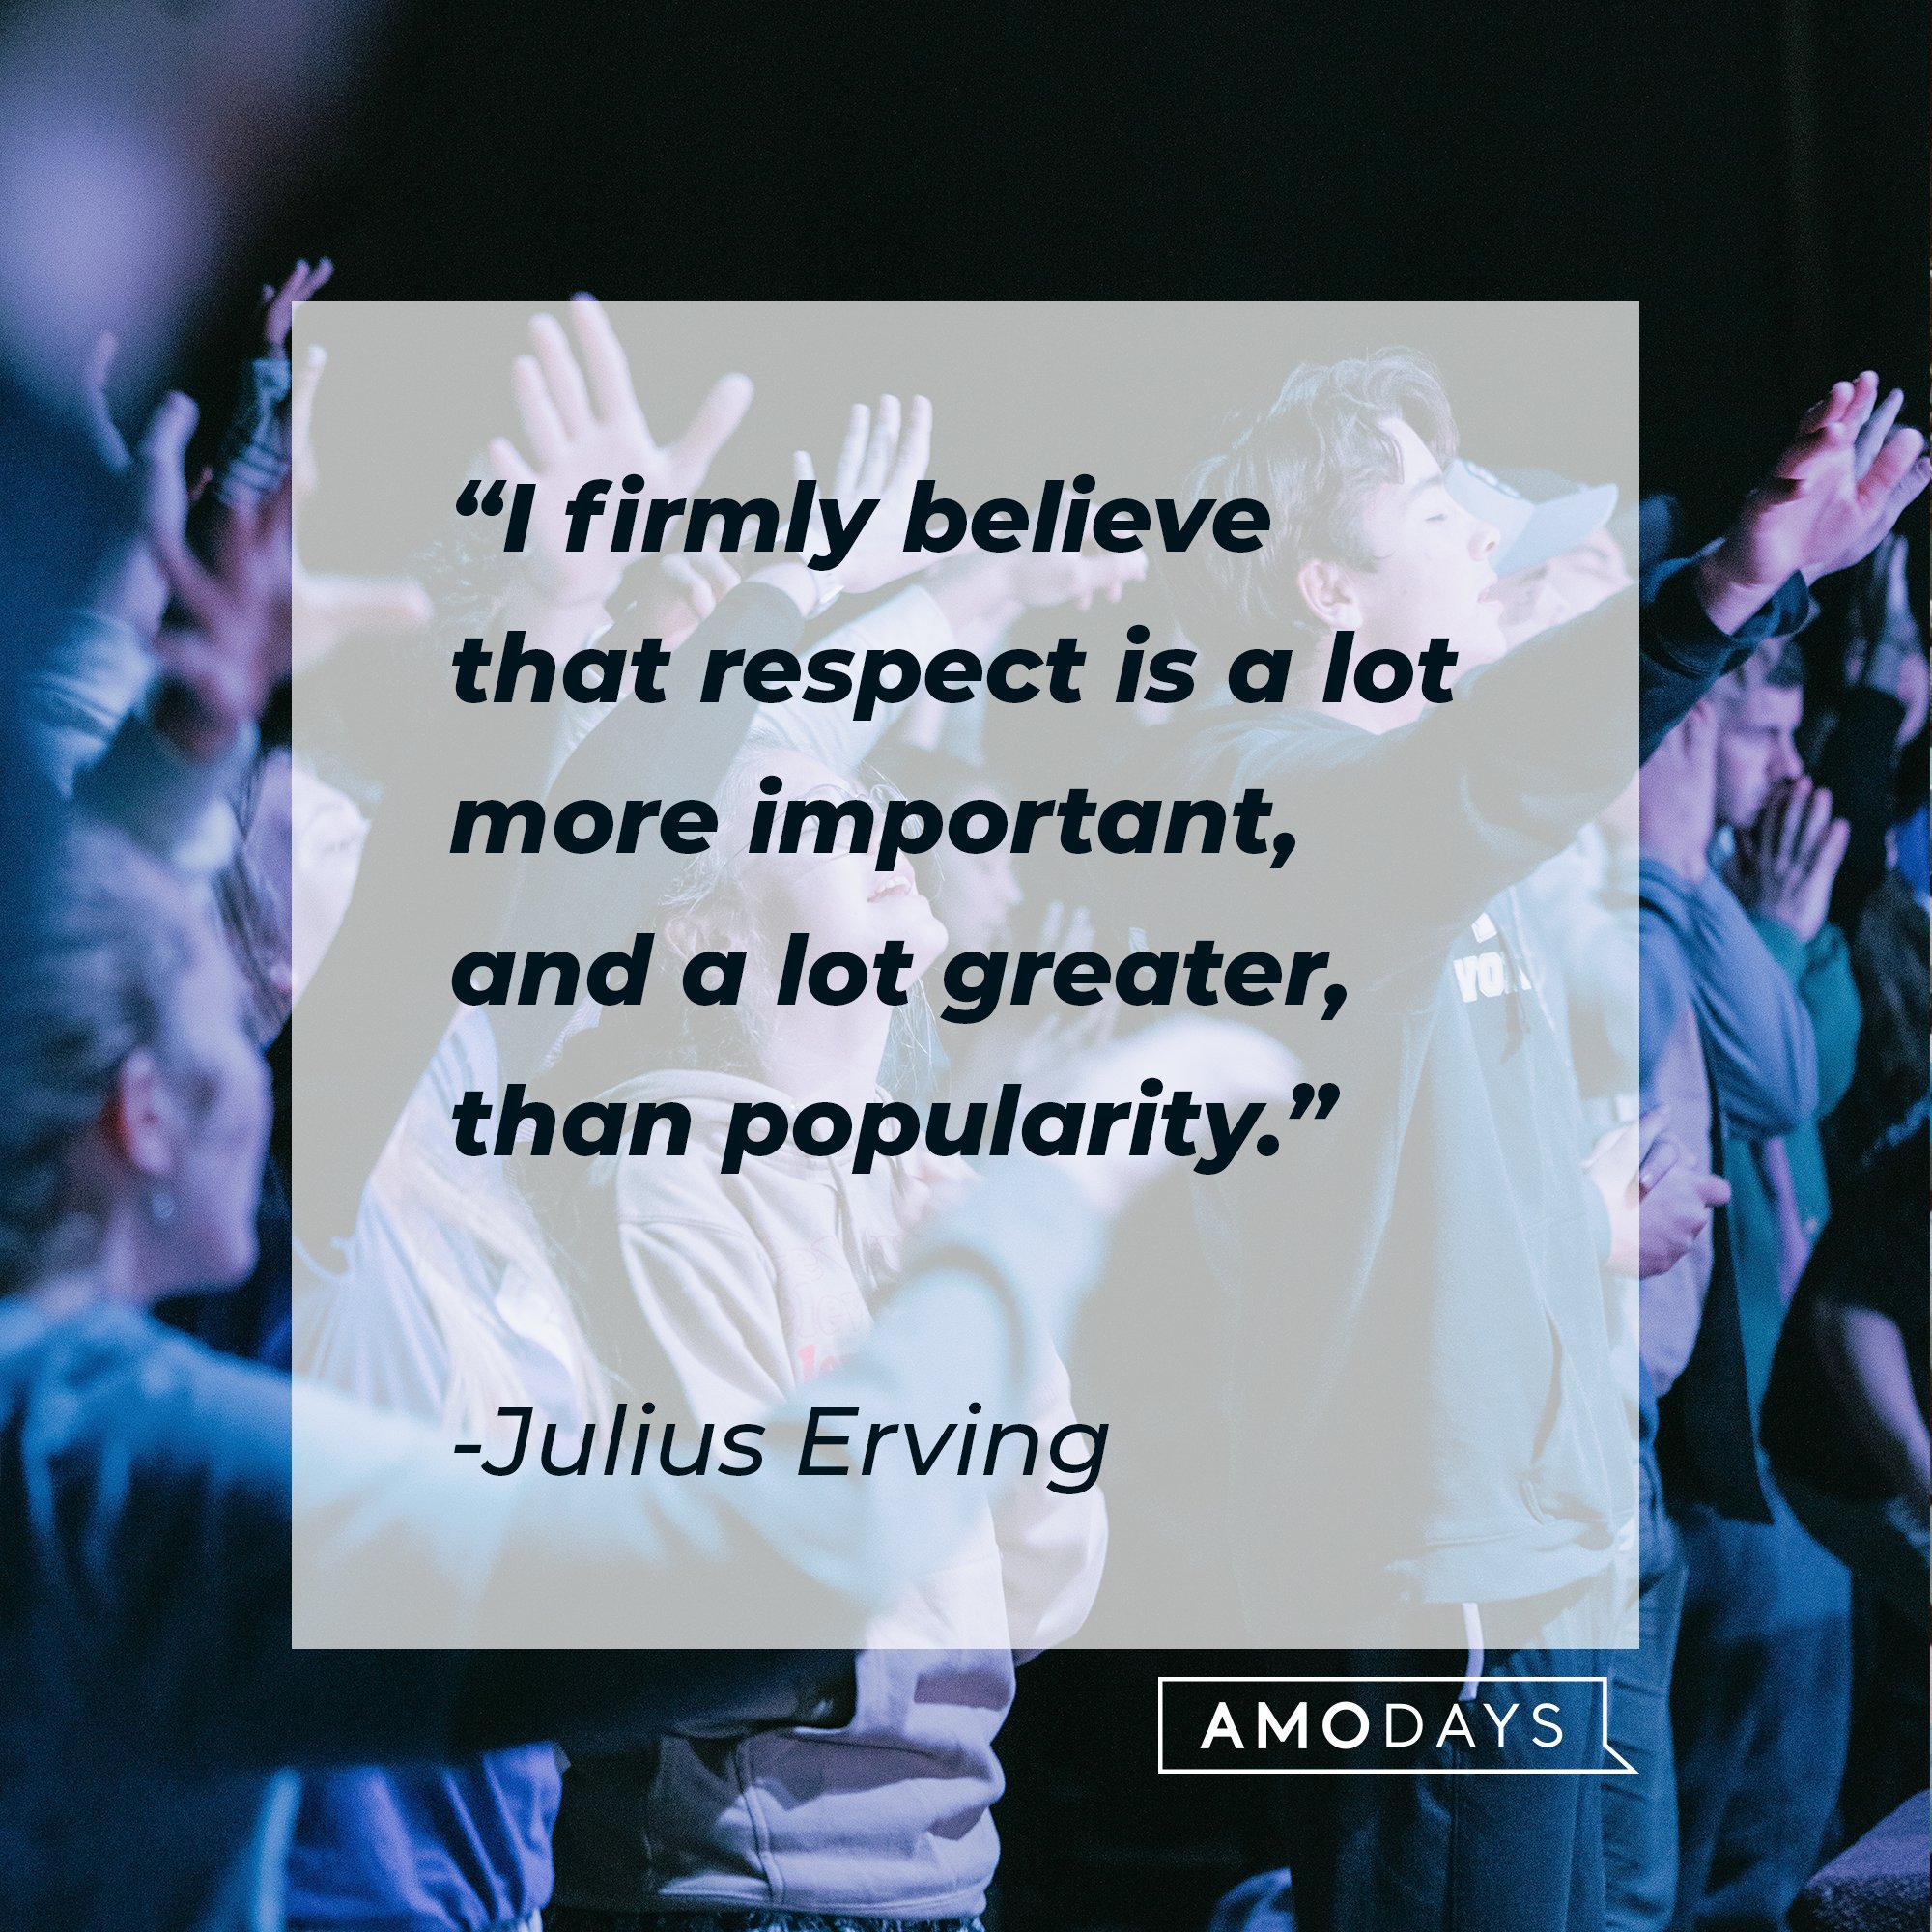 Julius Erving’s quote: "I firmly believe that respect is a lot more important, and a lot greater, than popularity." | Image: AmoDays